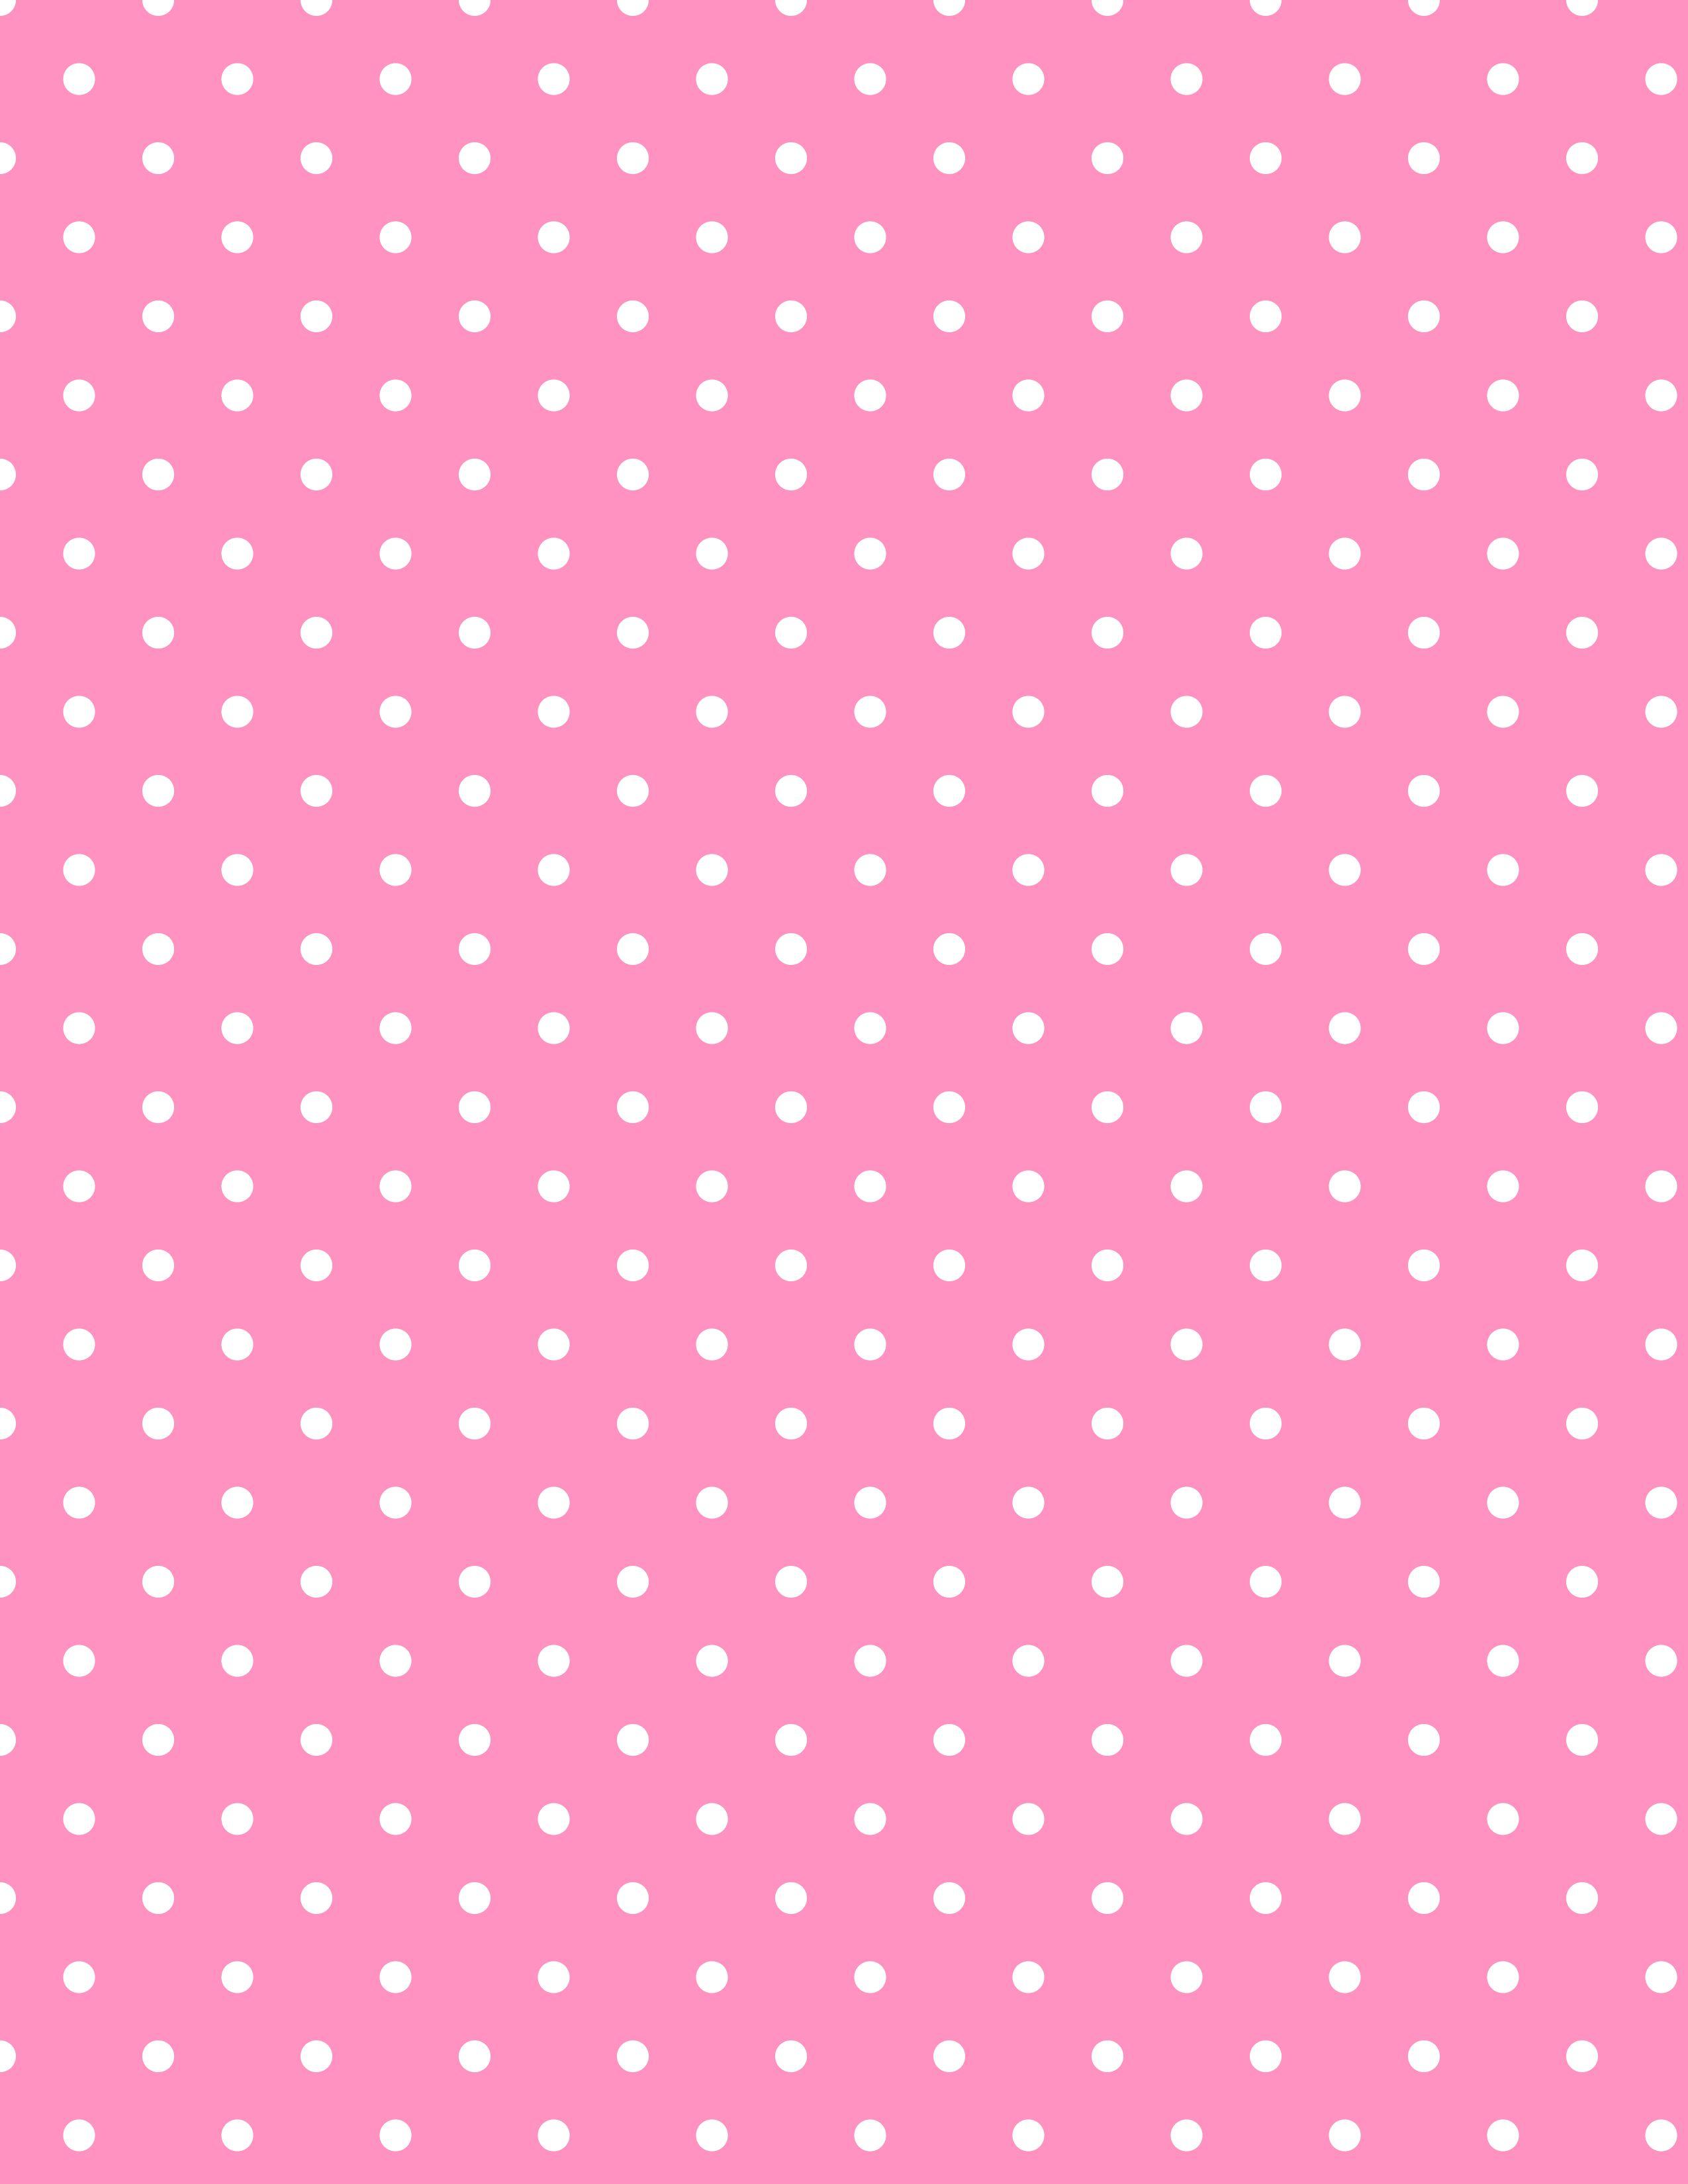 Pink Polka Dot Background Stock Photos Images Pictures Shutterstock ...